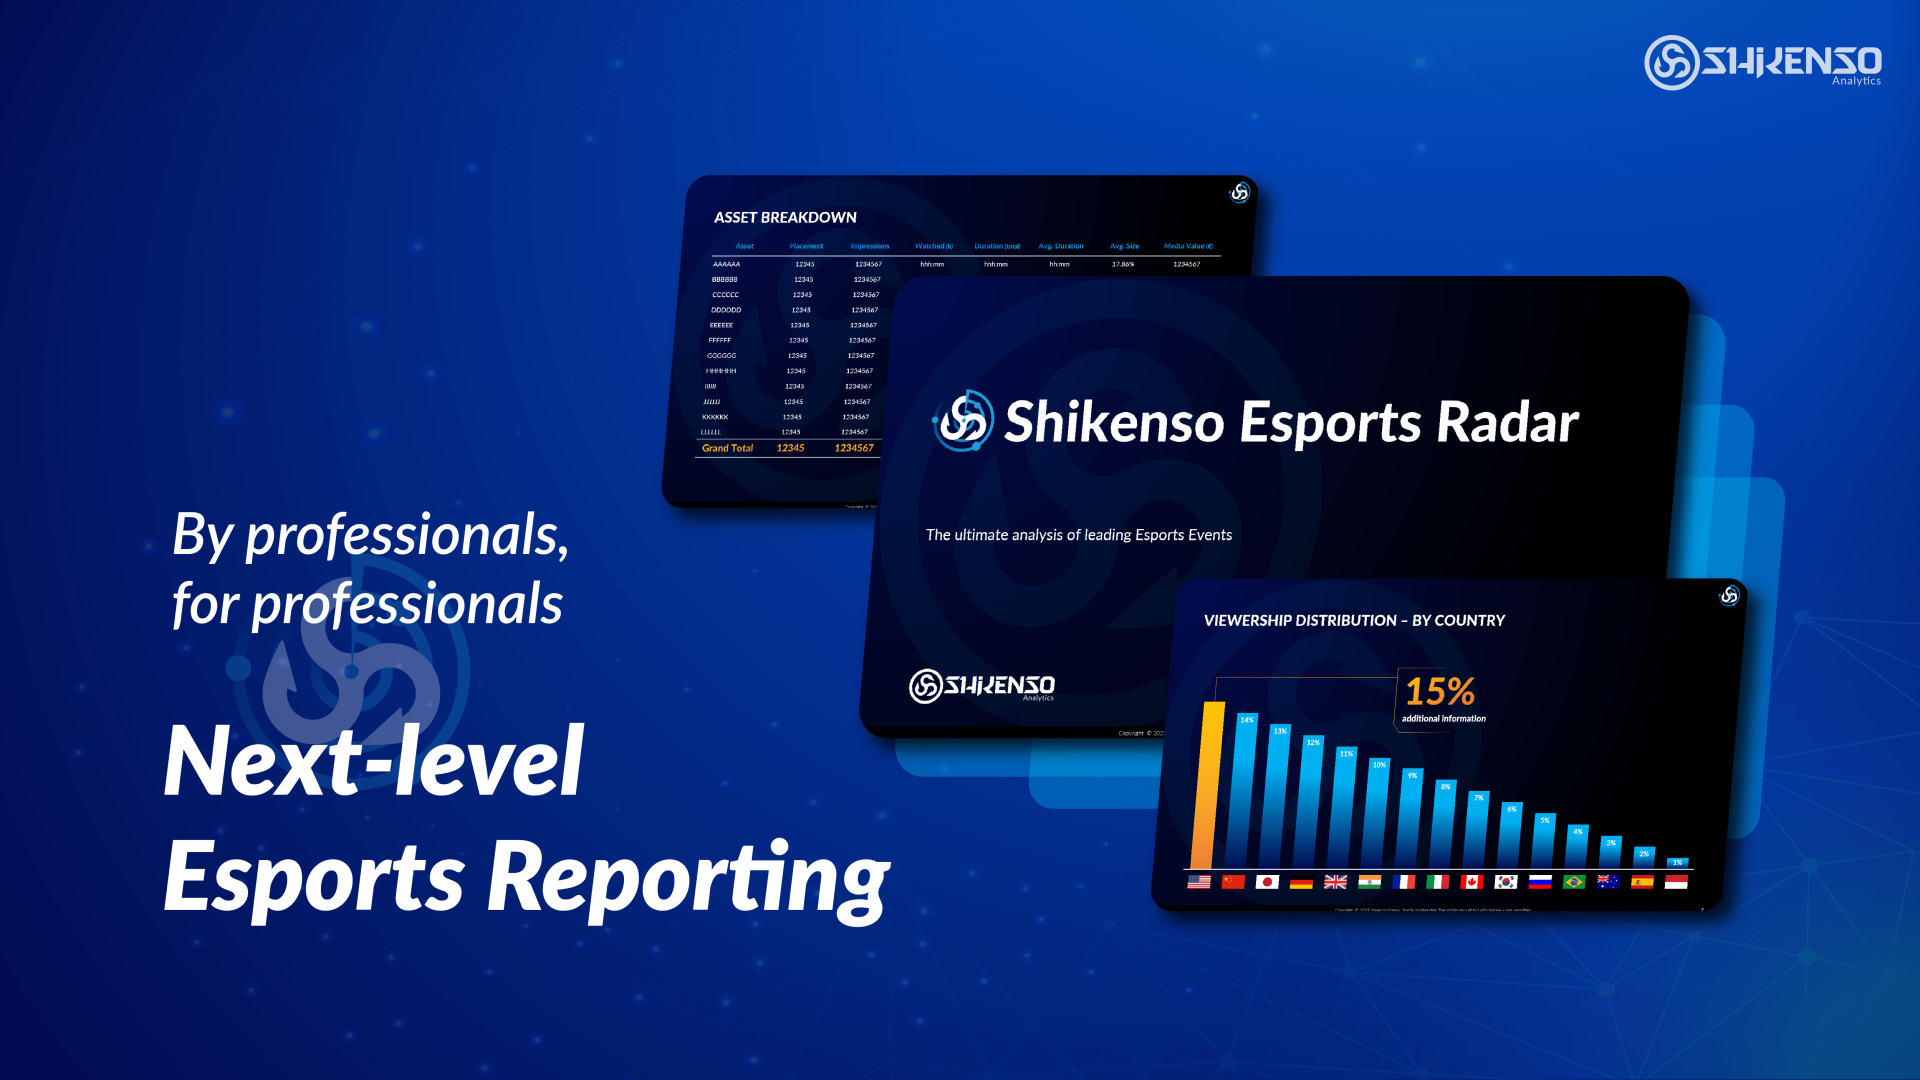 Fnatic secures partnership with Shikenso Analytics - Esports Insider